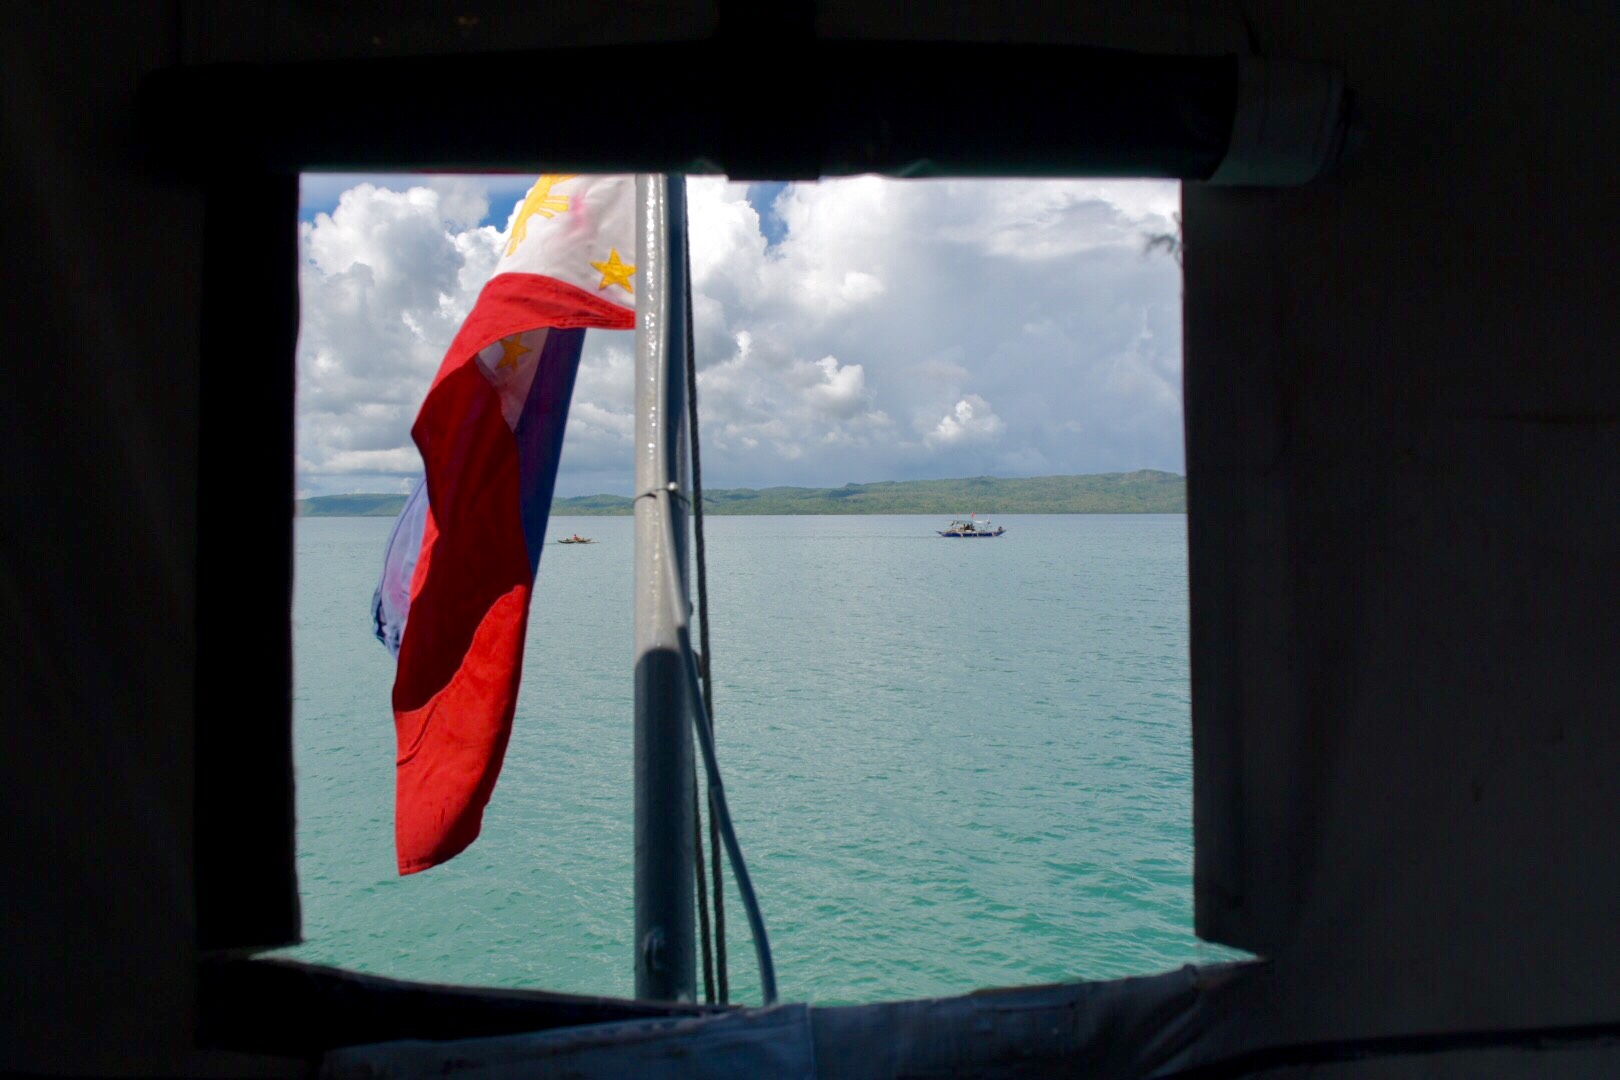 PHILIPPINE WATERS. A Philippine flag is flown in a boat off the waters near the coast of Occidental Mindoro in the West Philippine Sea. File photo by LeAnne Jazul/Rappler  